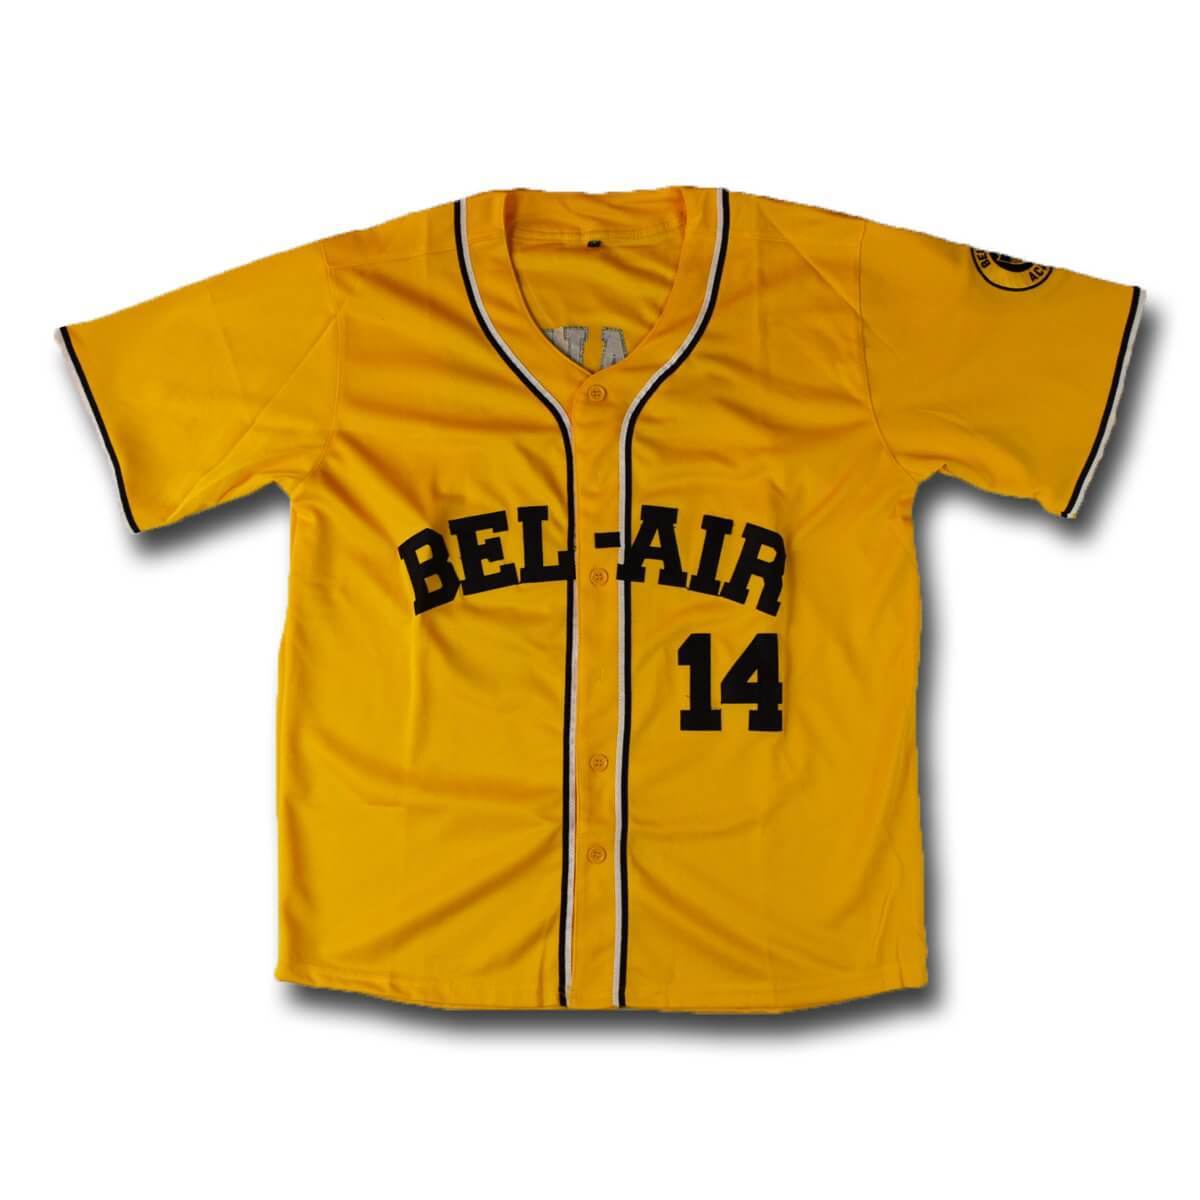 Fresh Prince of Bel Air Baseball Jersey Will Smith #14